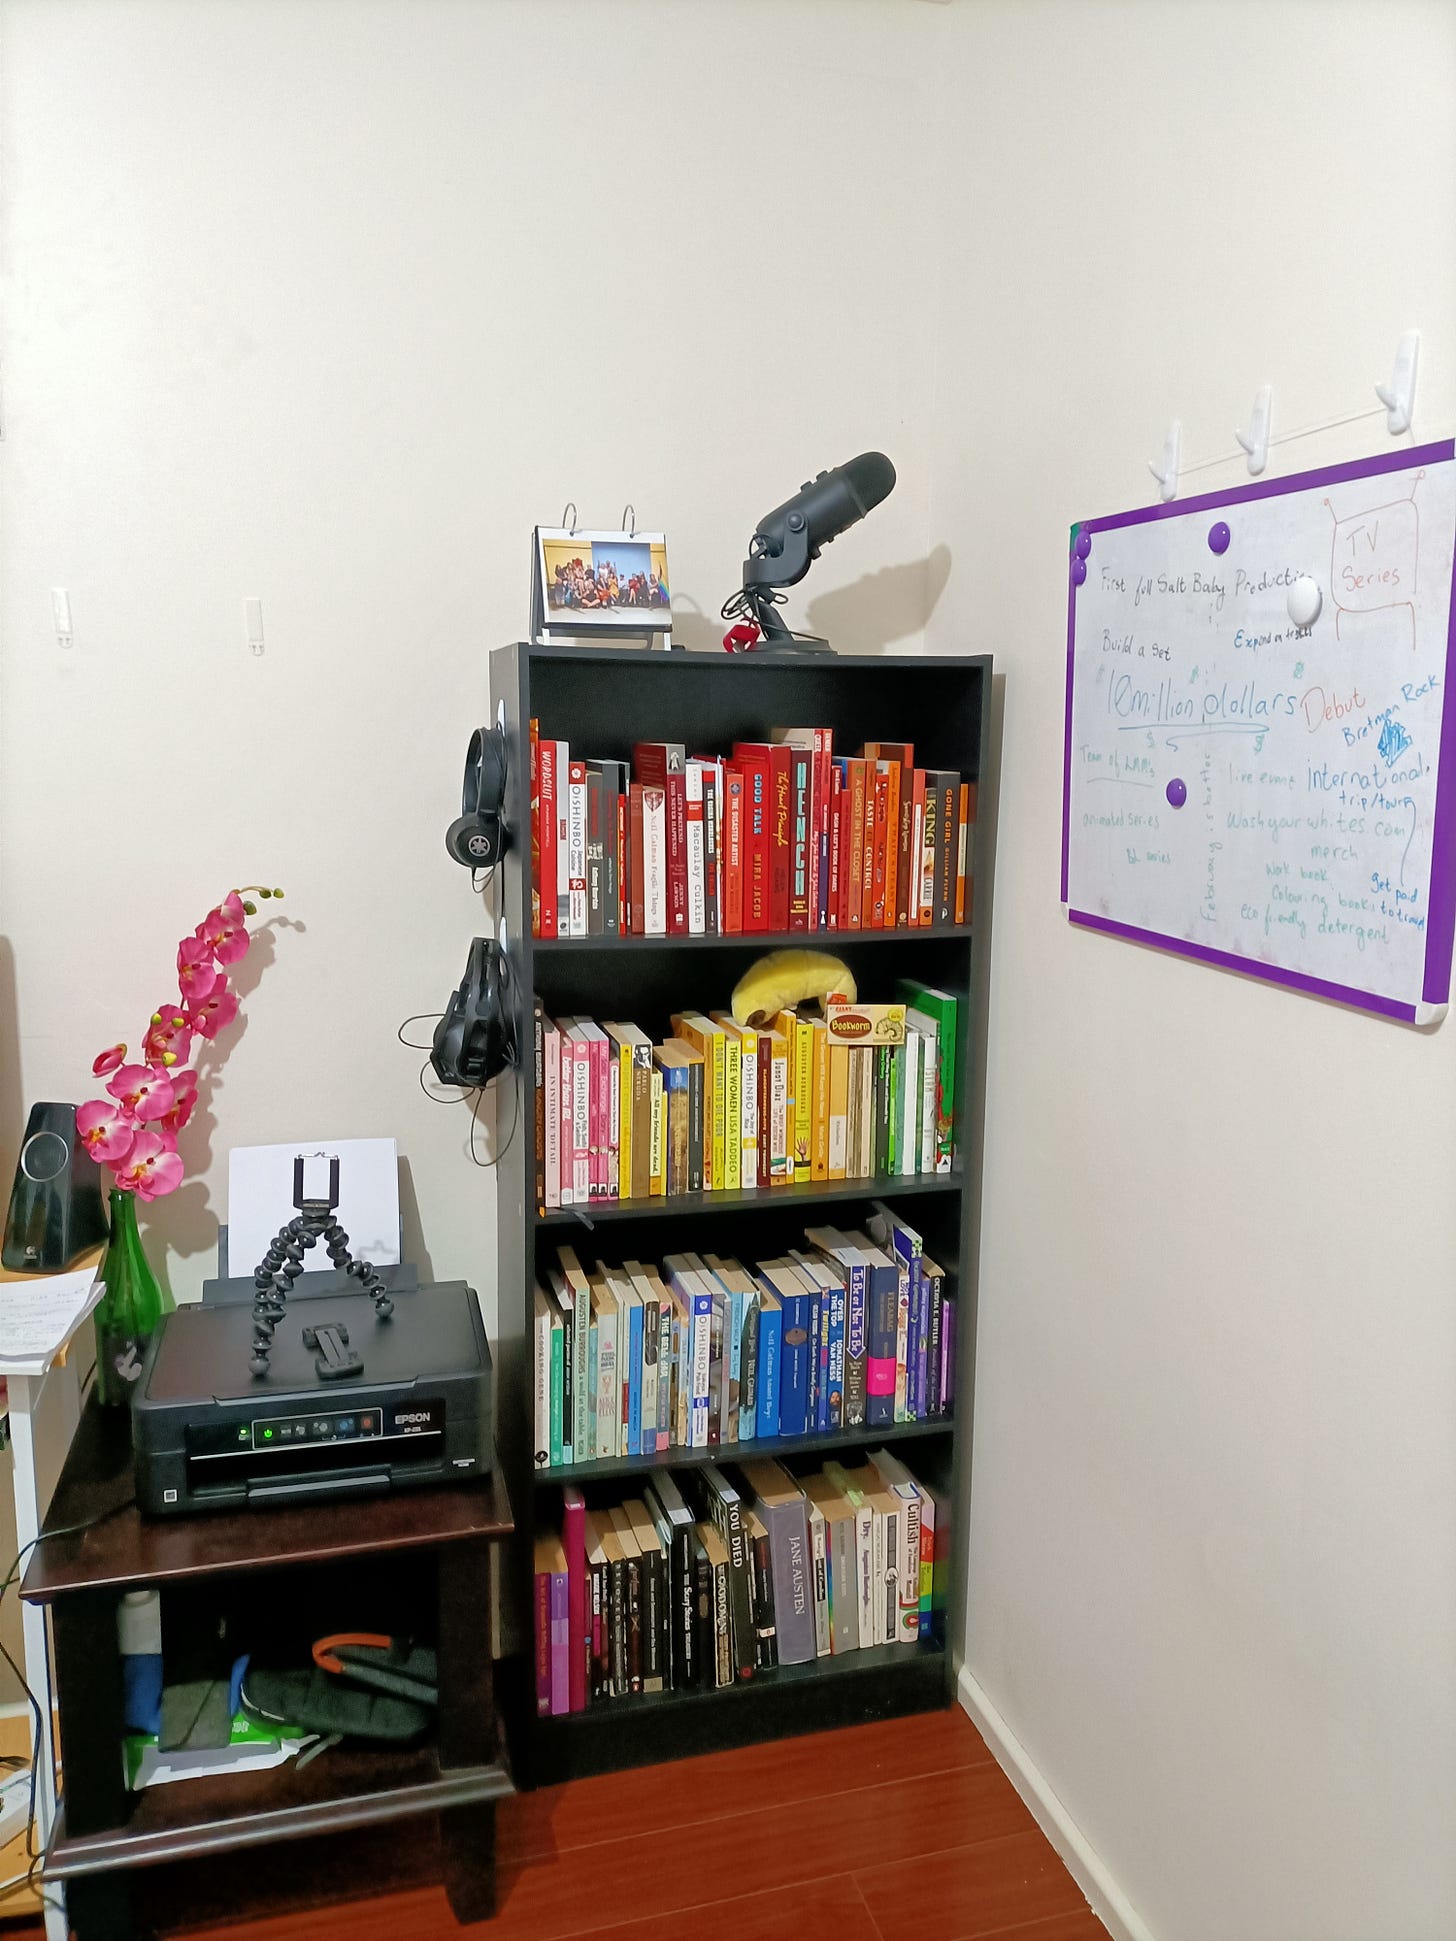 A photo from Miranda's home office. On the left, you can see the printer on a side table, next to a green bottle with a fake orchid. To the wall on the right, you can see a hanging whiteboard scribbled with dreams. Centre of the photo is their pride and joy, their rainbow organised bookshelf. It goes from red on top to black/white/grey on the bottom, and includes a variety of fiction, non-fiction, graphic novels and more.